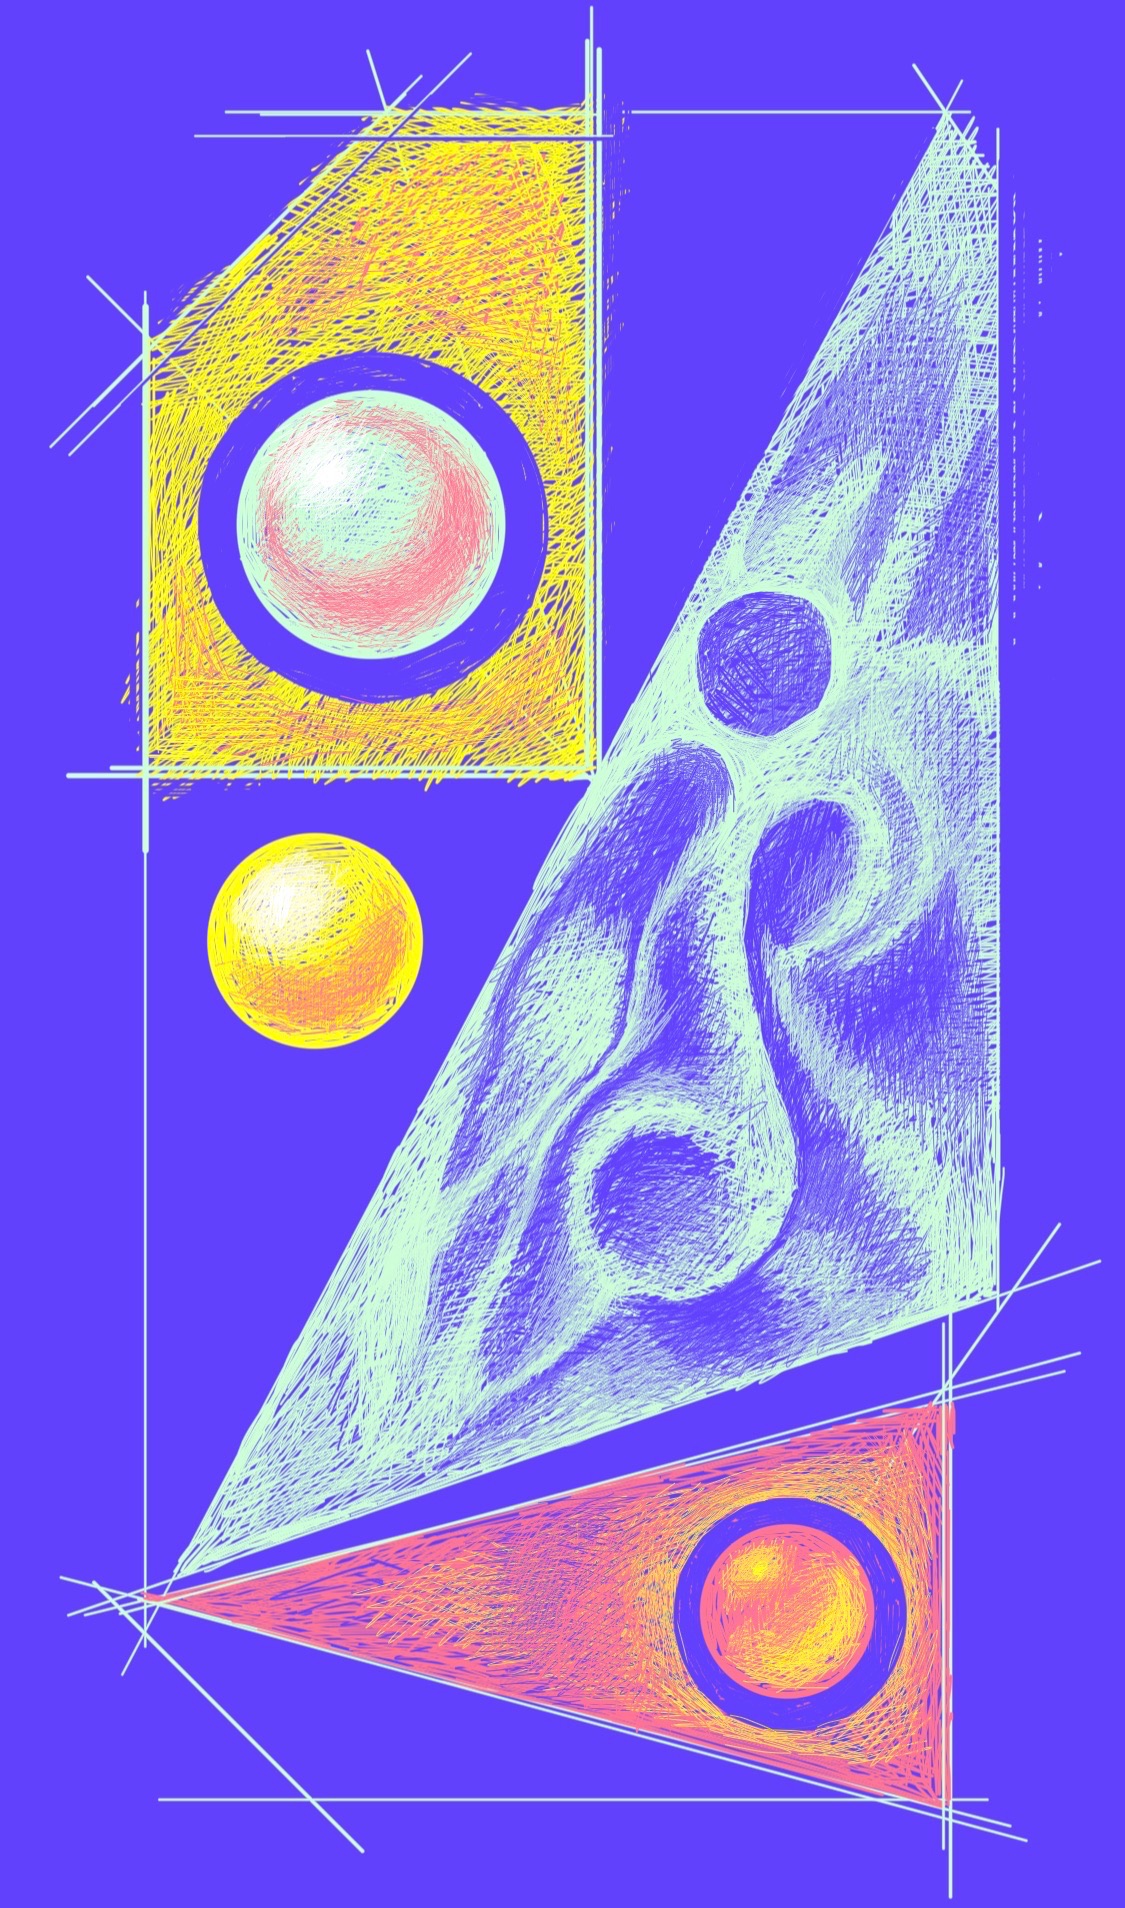 An abstract sketch of some geometric, textured objects